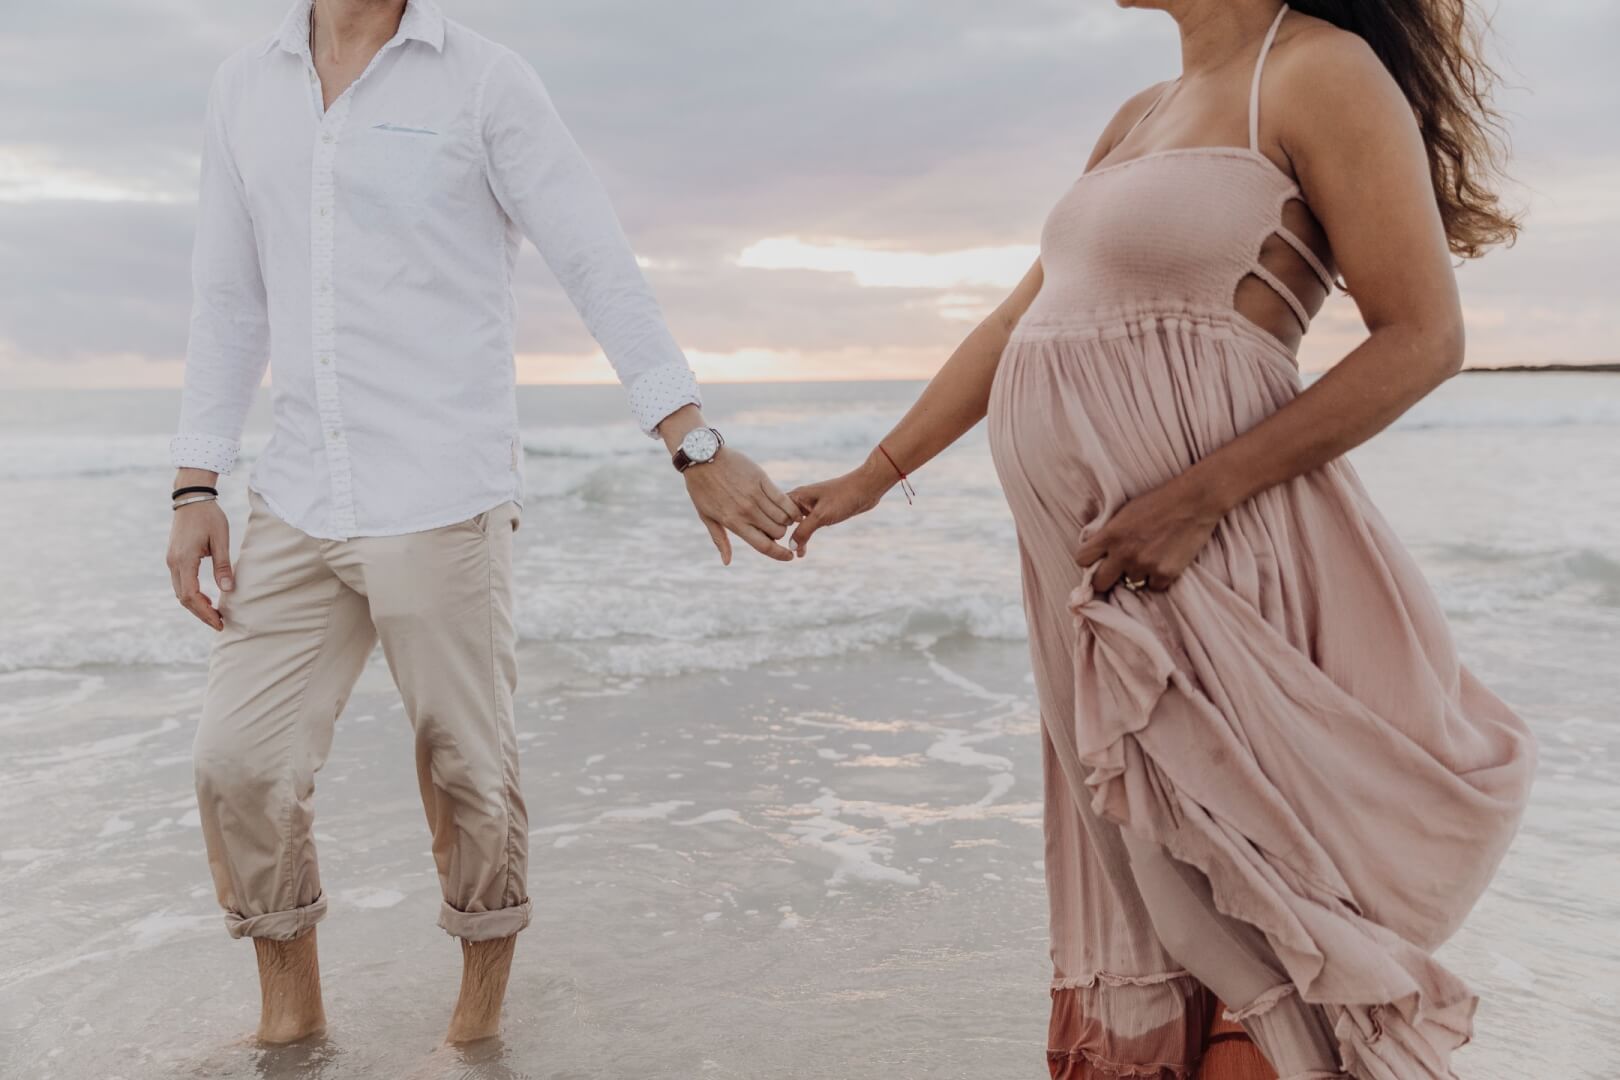 Exuberant pregnant woman wearing a flowy sundress and her supportive husband standing hand-in-hand on the white sandy beach of Miami, Florida, gazing out onto the vast expanse of the bright blue ocean.